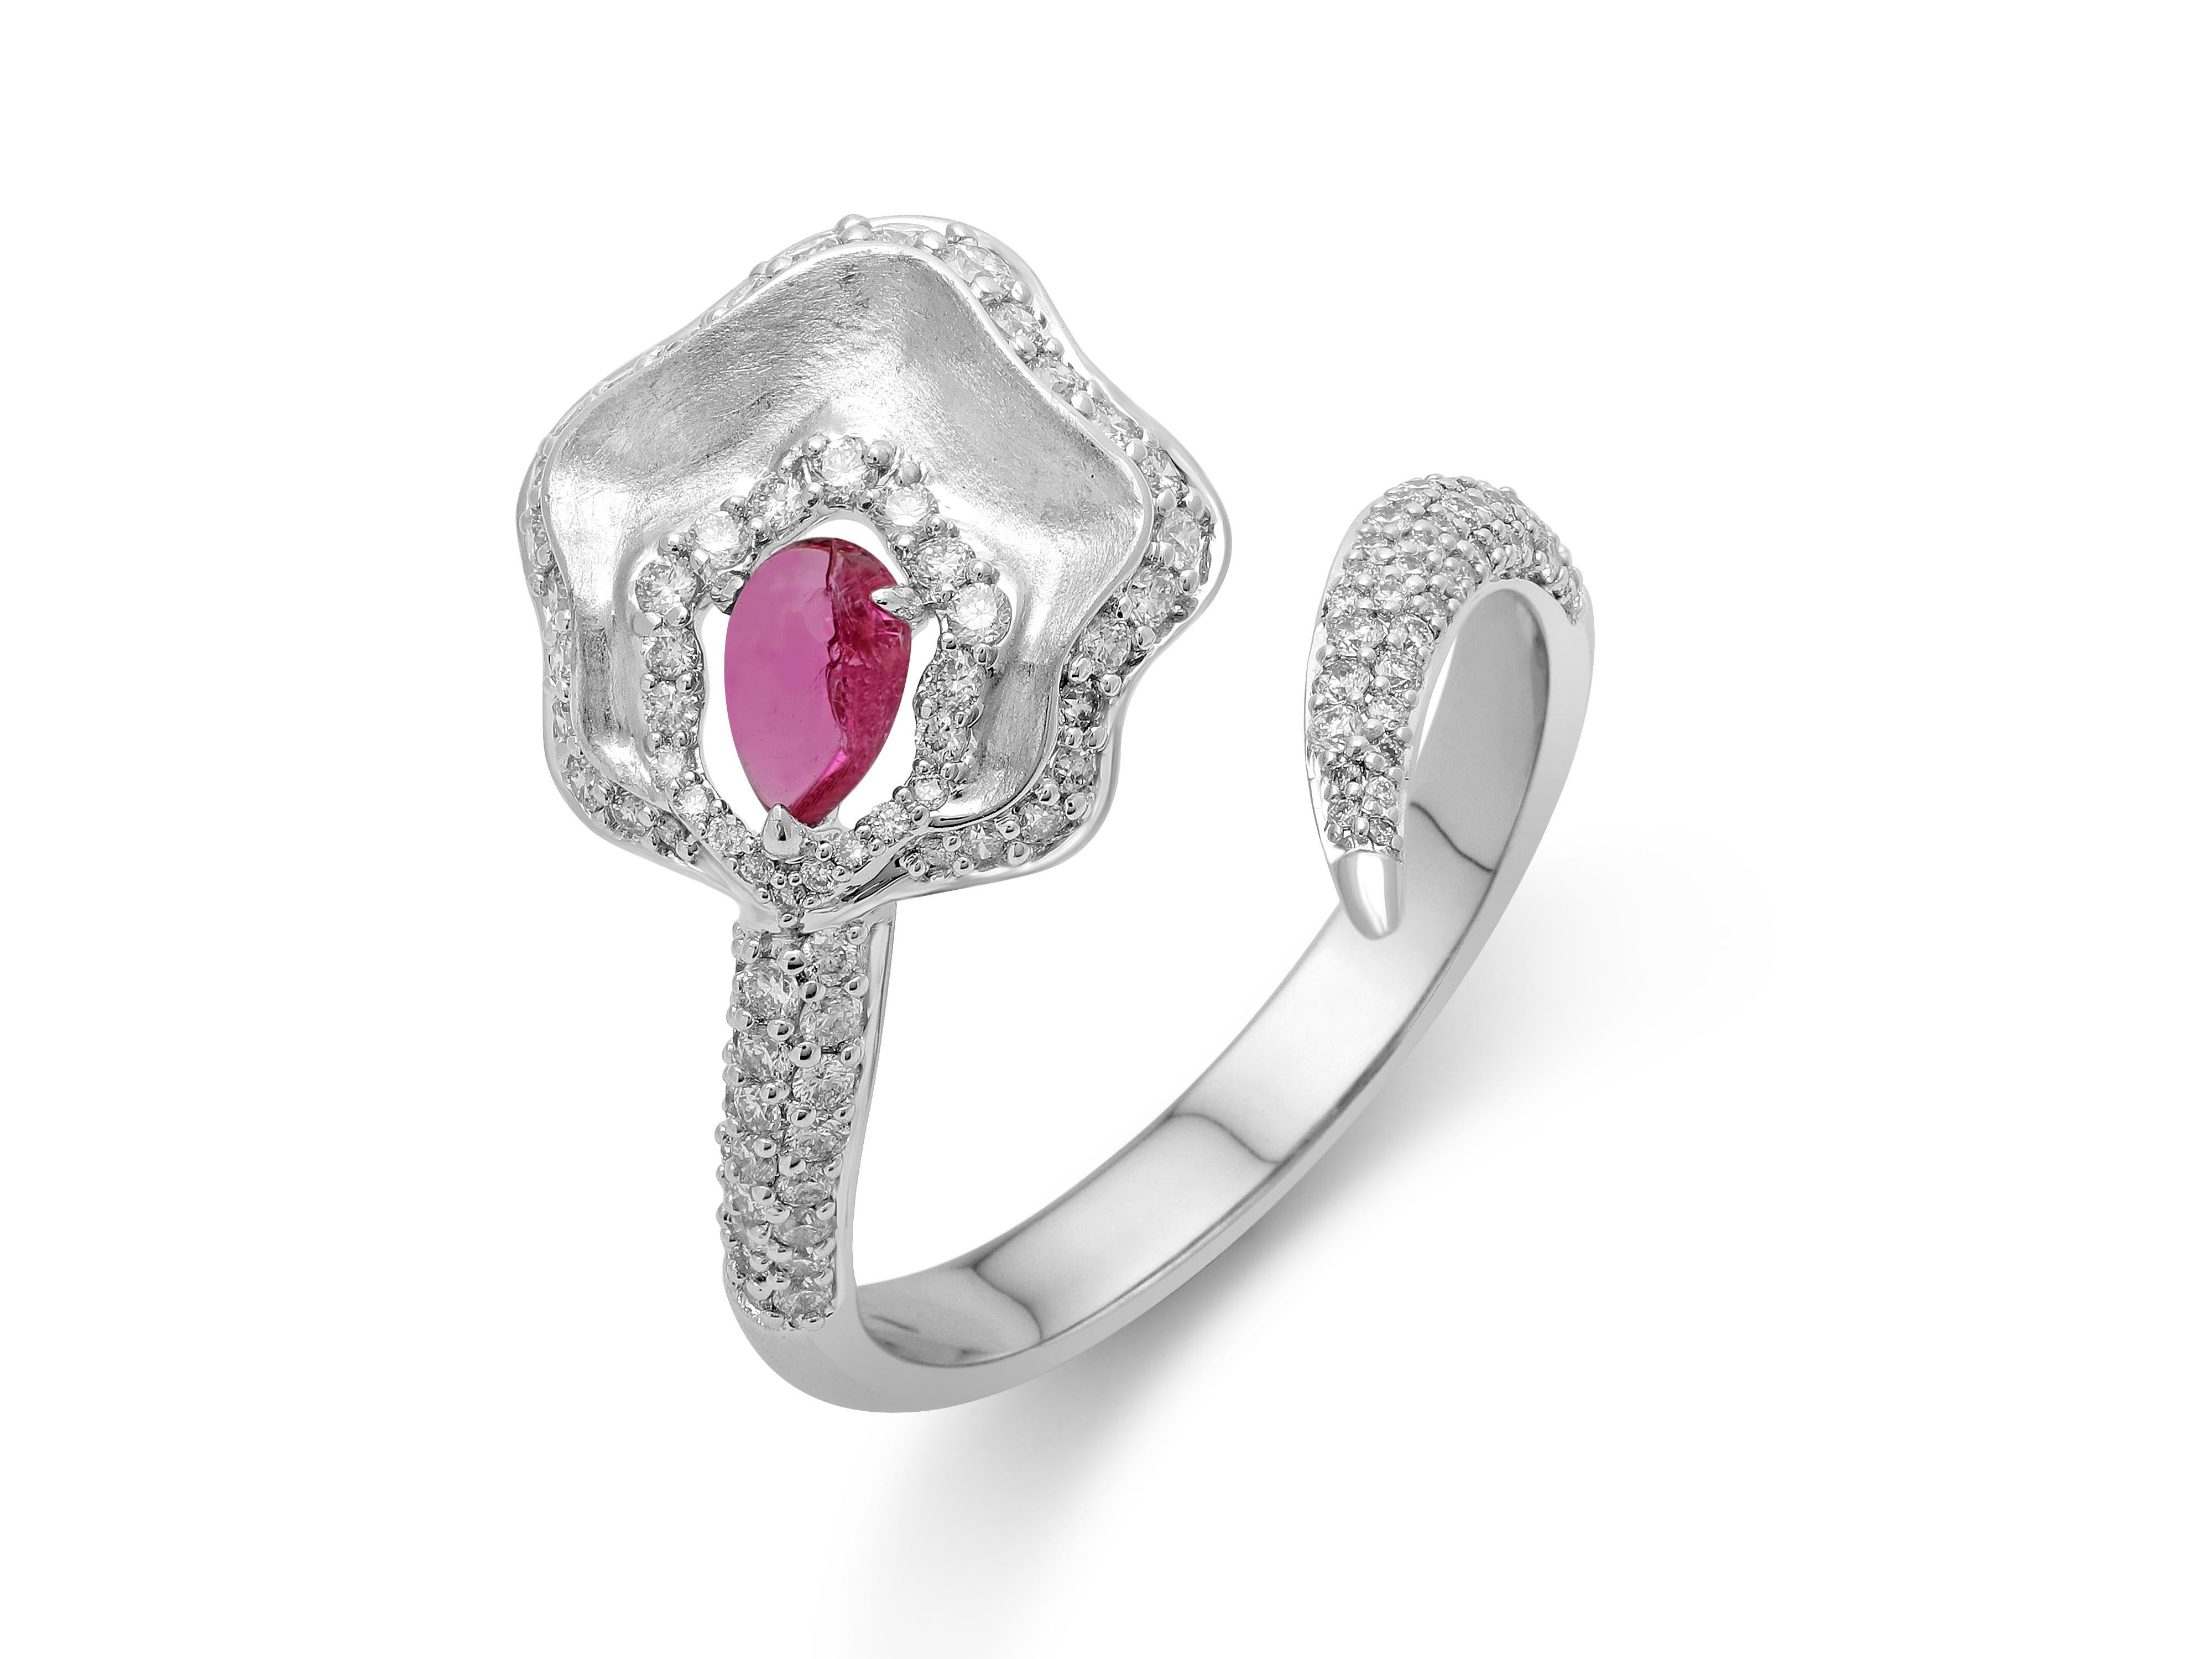 A stunning rubellite and diamond ring with a matte finish to create a subtle yet sophisticated look.

•	Total Diamond Weight: 0.49 carats of round, brilliant-cut diamonds 	
•	Rubellite: 0.24 carats
•	Diamond quality/colour: VS/FG (clean,